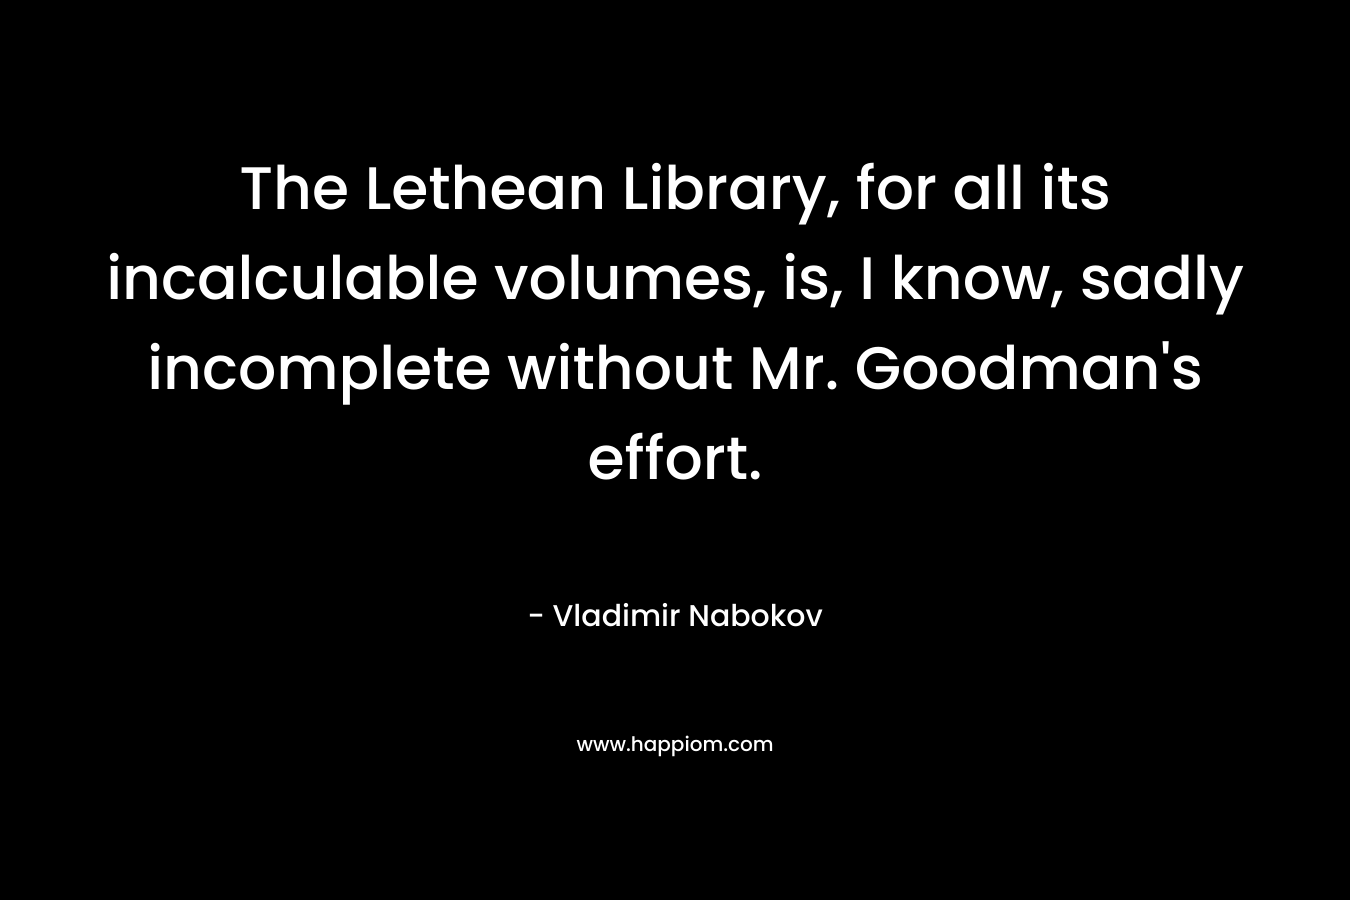 The Lethean Library, for all its incalculable volumes, is, I know, sadly incomplete without Mr. Goodman’s effort. – Vladimir Nabokov